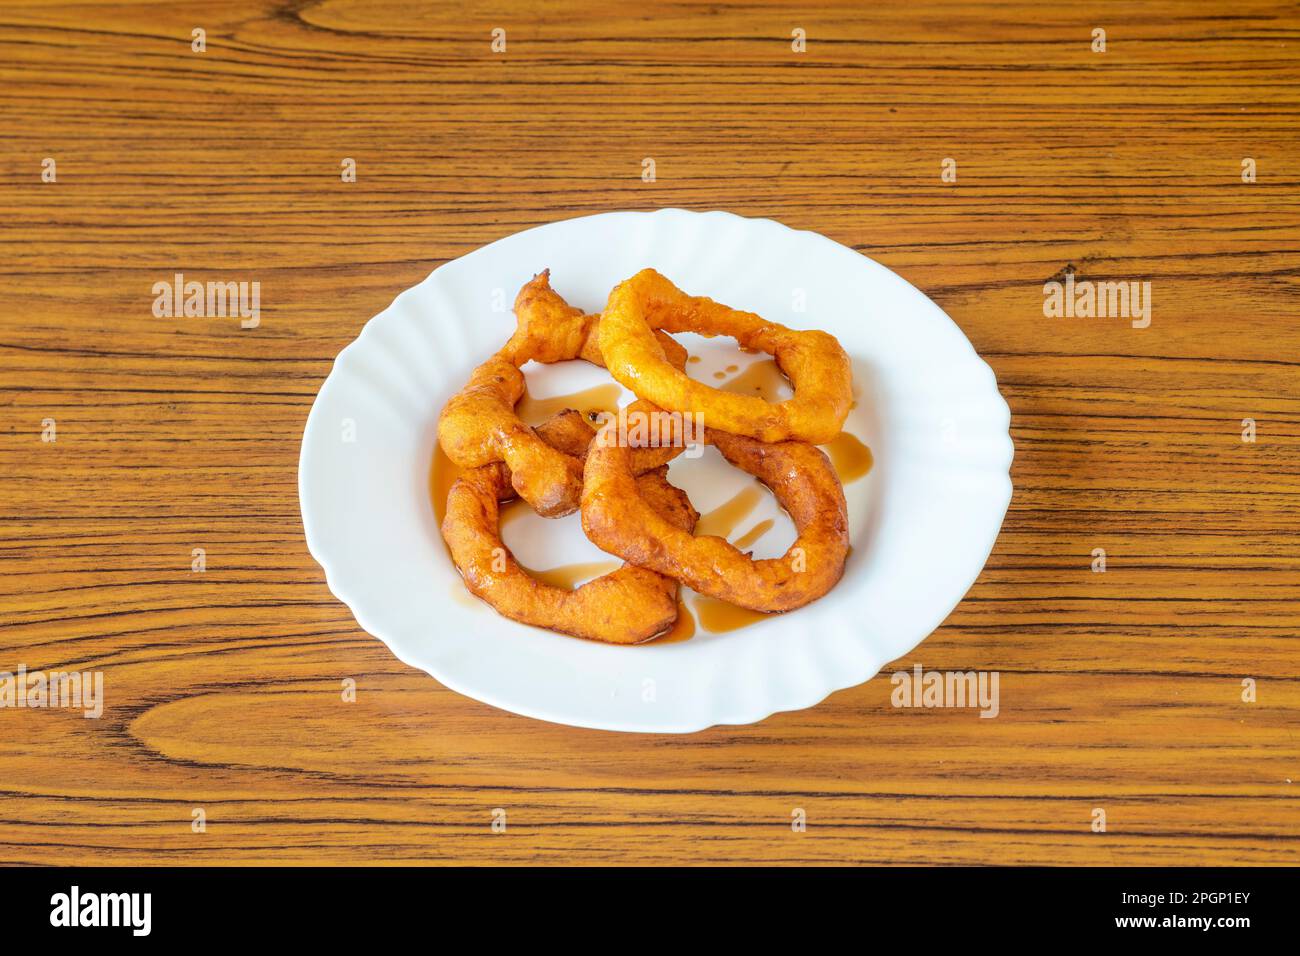 Picarones are ring-shaped fried sweets made with wheat flour dough mixed with squash, and sometimes sweet potato, bathed in flavored chancaca honey Stock Photo